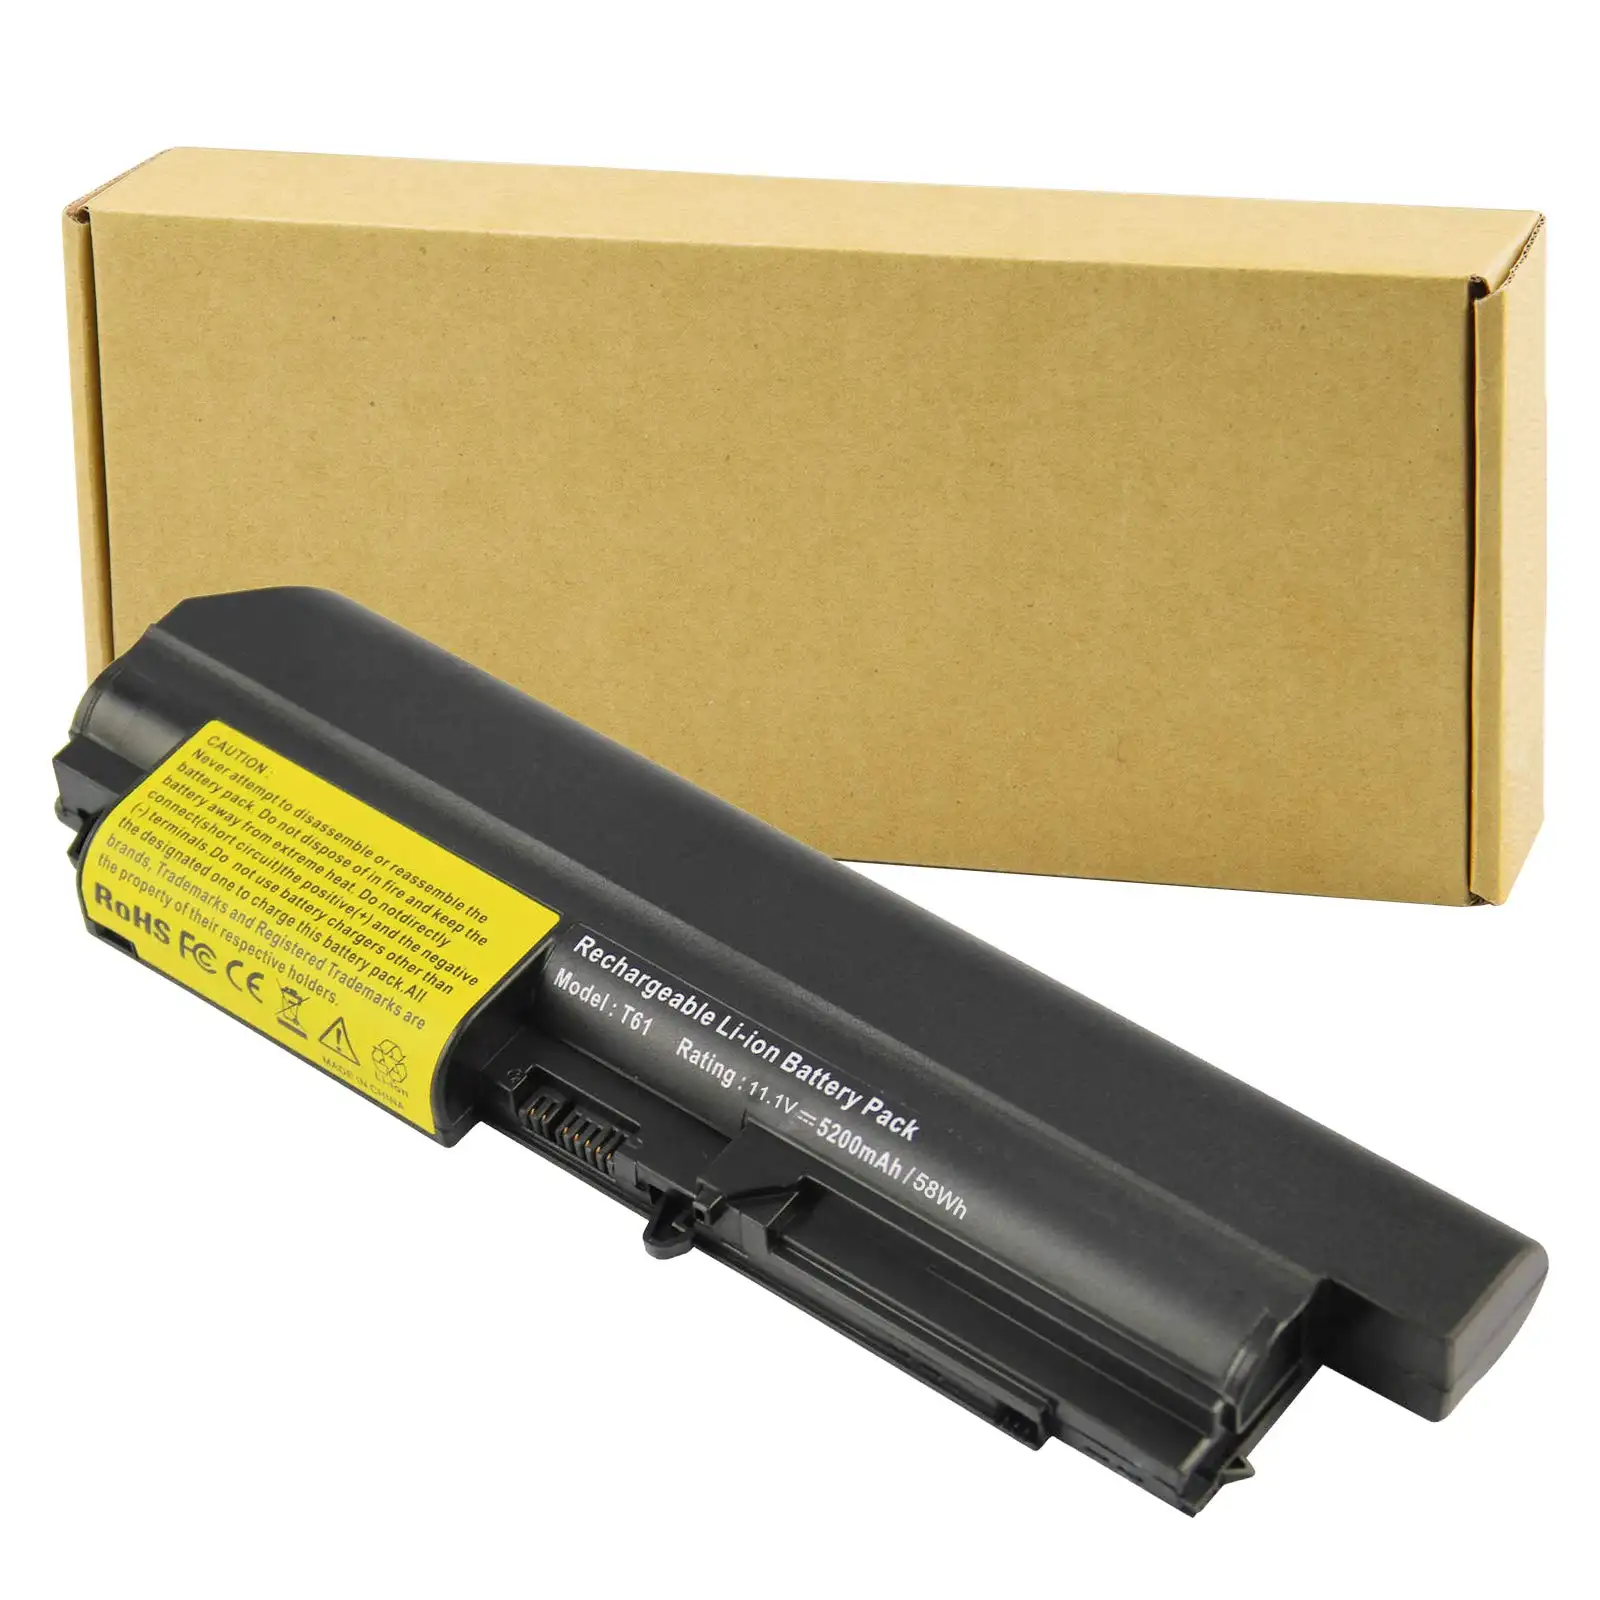 10.8V 7800mAh High Performance Battery fit IBM ThinkPad Widescreen R61 R61i T61 T61p T400 R400 Series replacement Laptop Battery